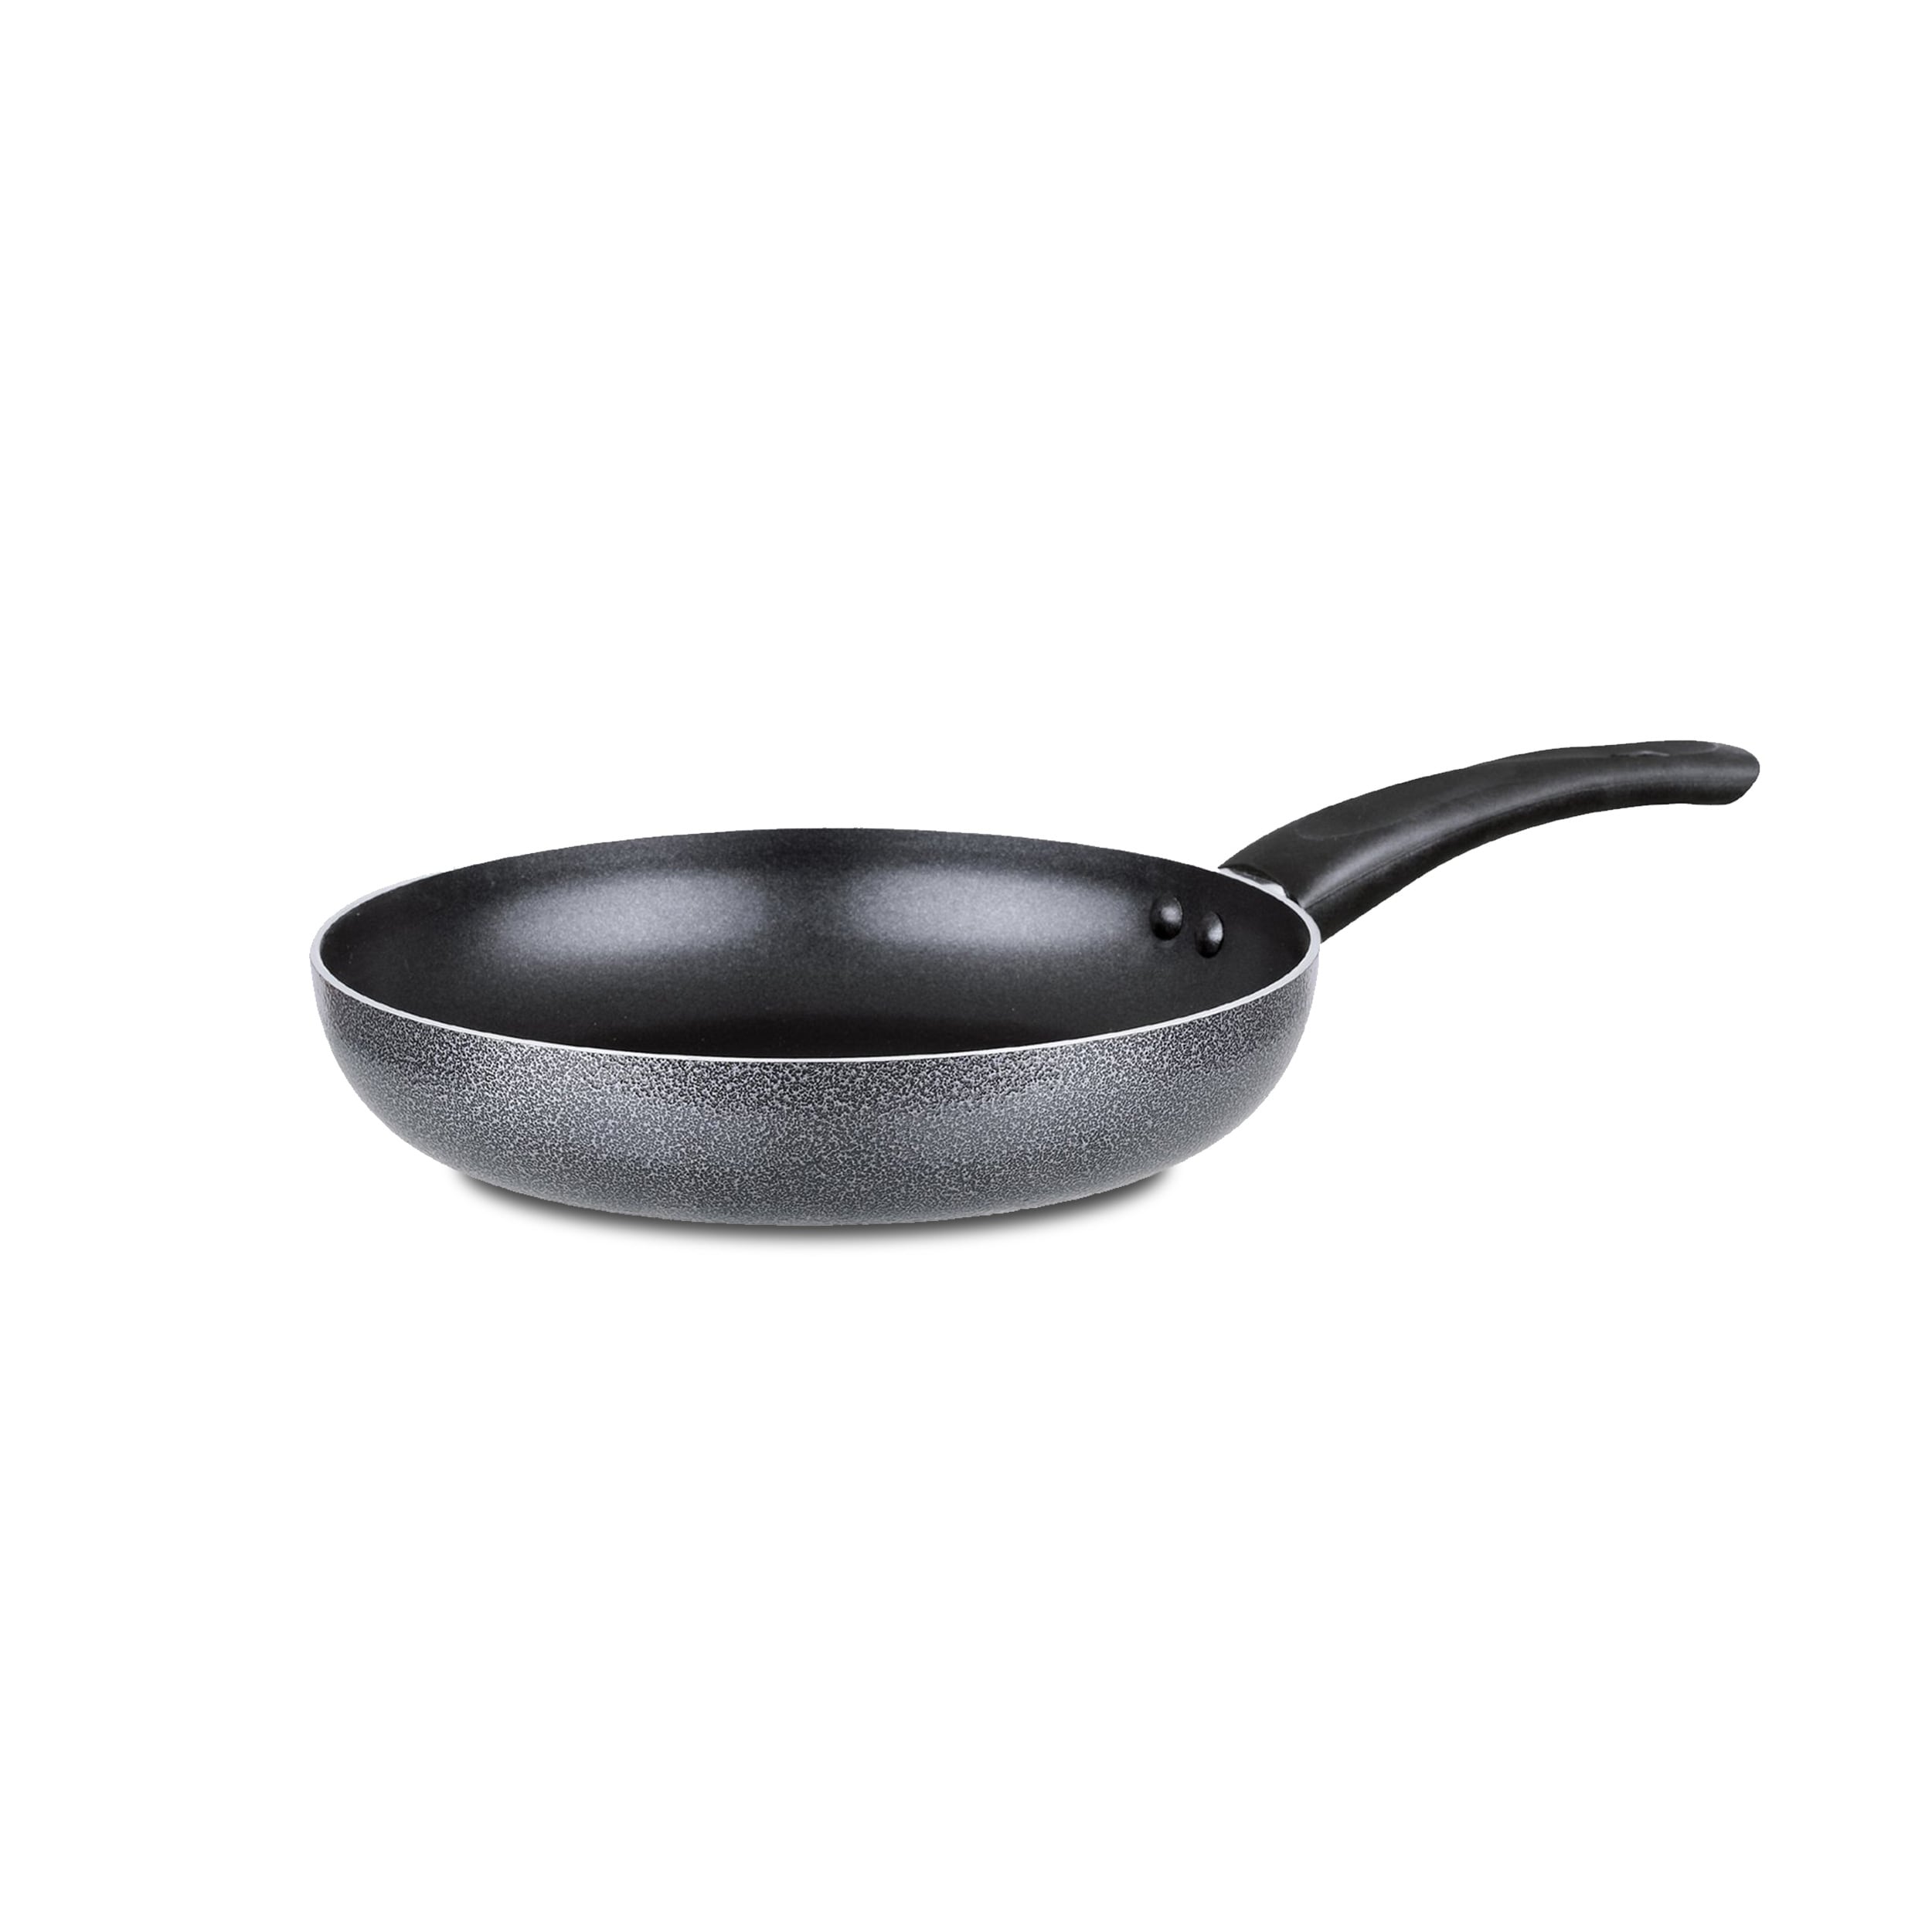 https://ak1.ostkcdn.com/images/products/is/images/direct/50ae8d058a941c3b0a66b6018e66e54394316fdf/Brentwood-Wok-Aluminum-Non-Stick-9.5%22-Gray.jpg